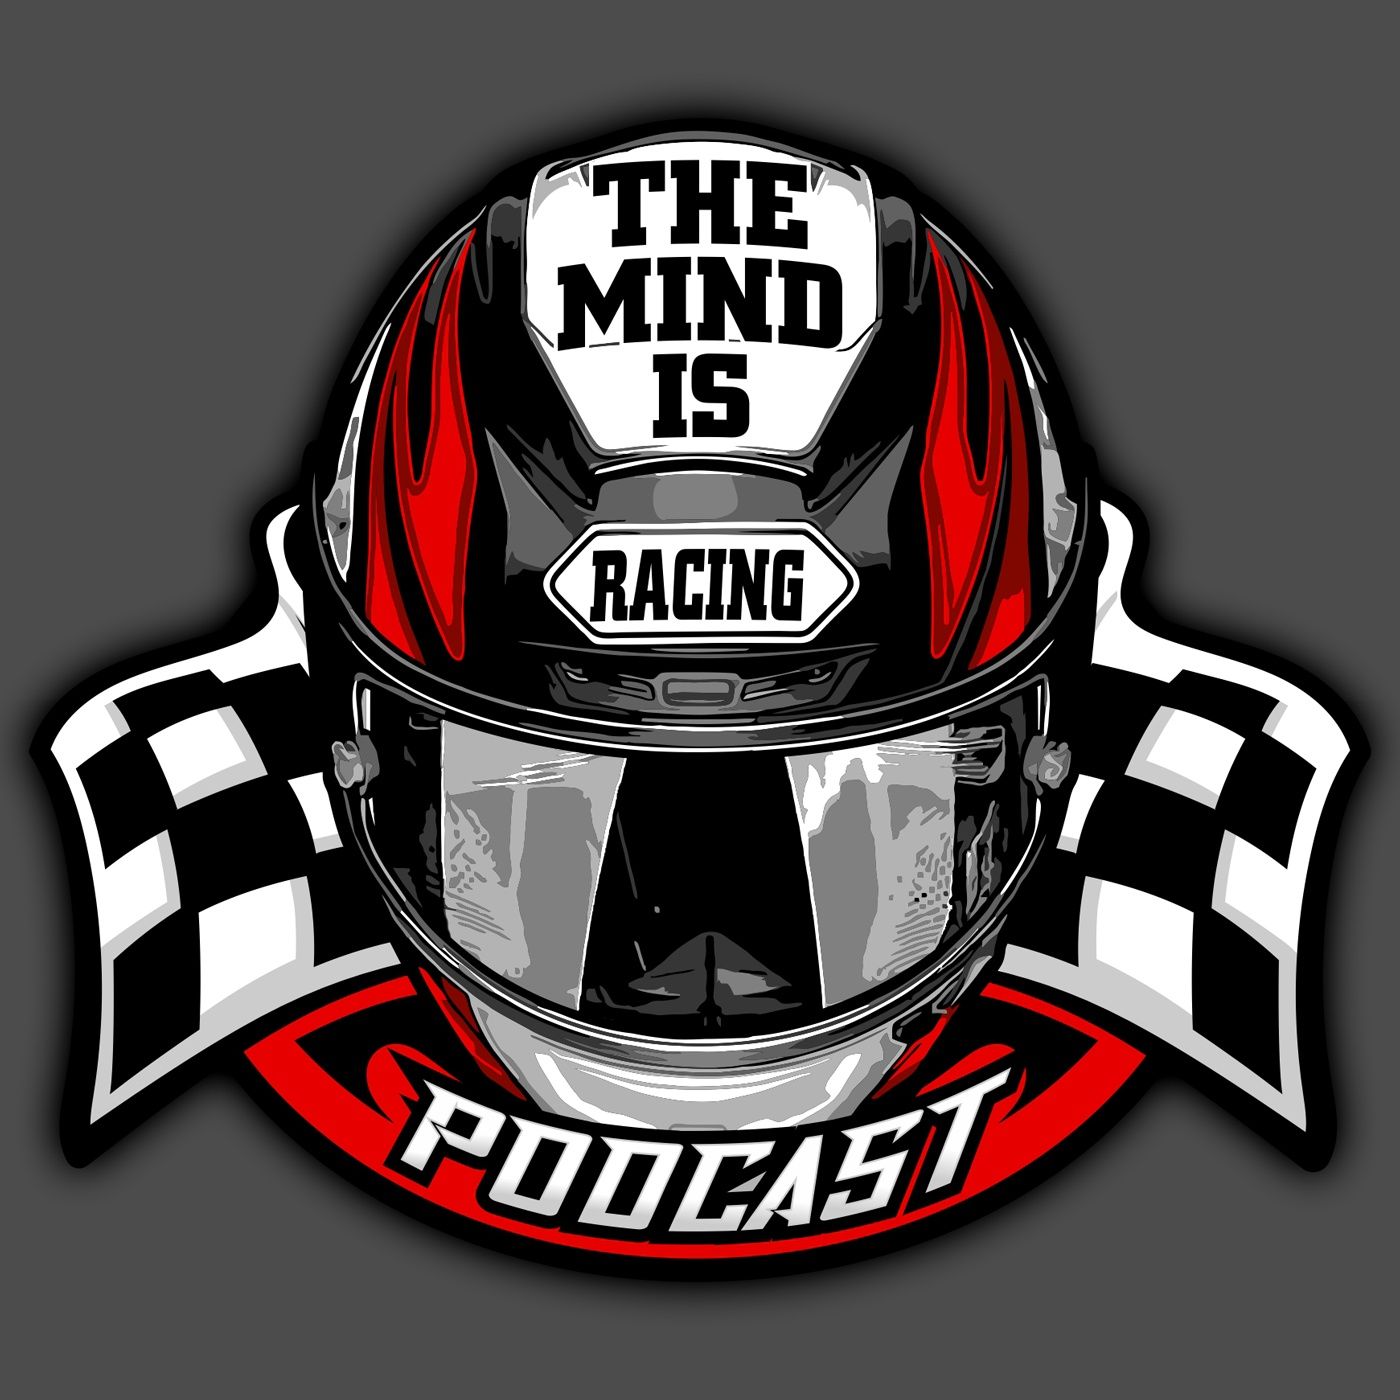 Episode 12 | CARS Tour at Florence, Social Media sucks, and WTF happened to NASCAR?